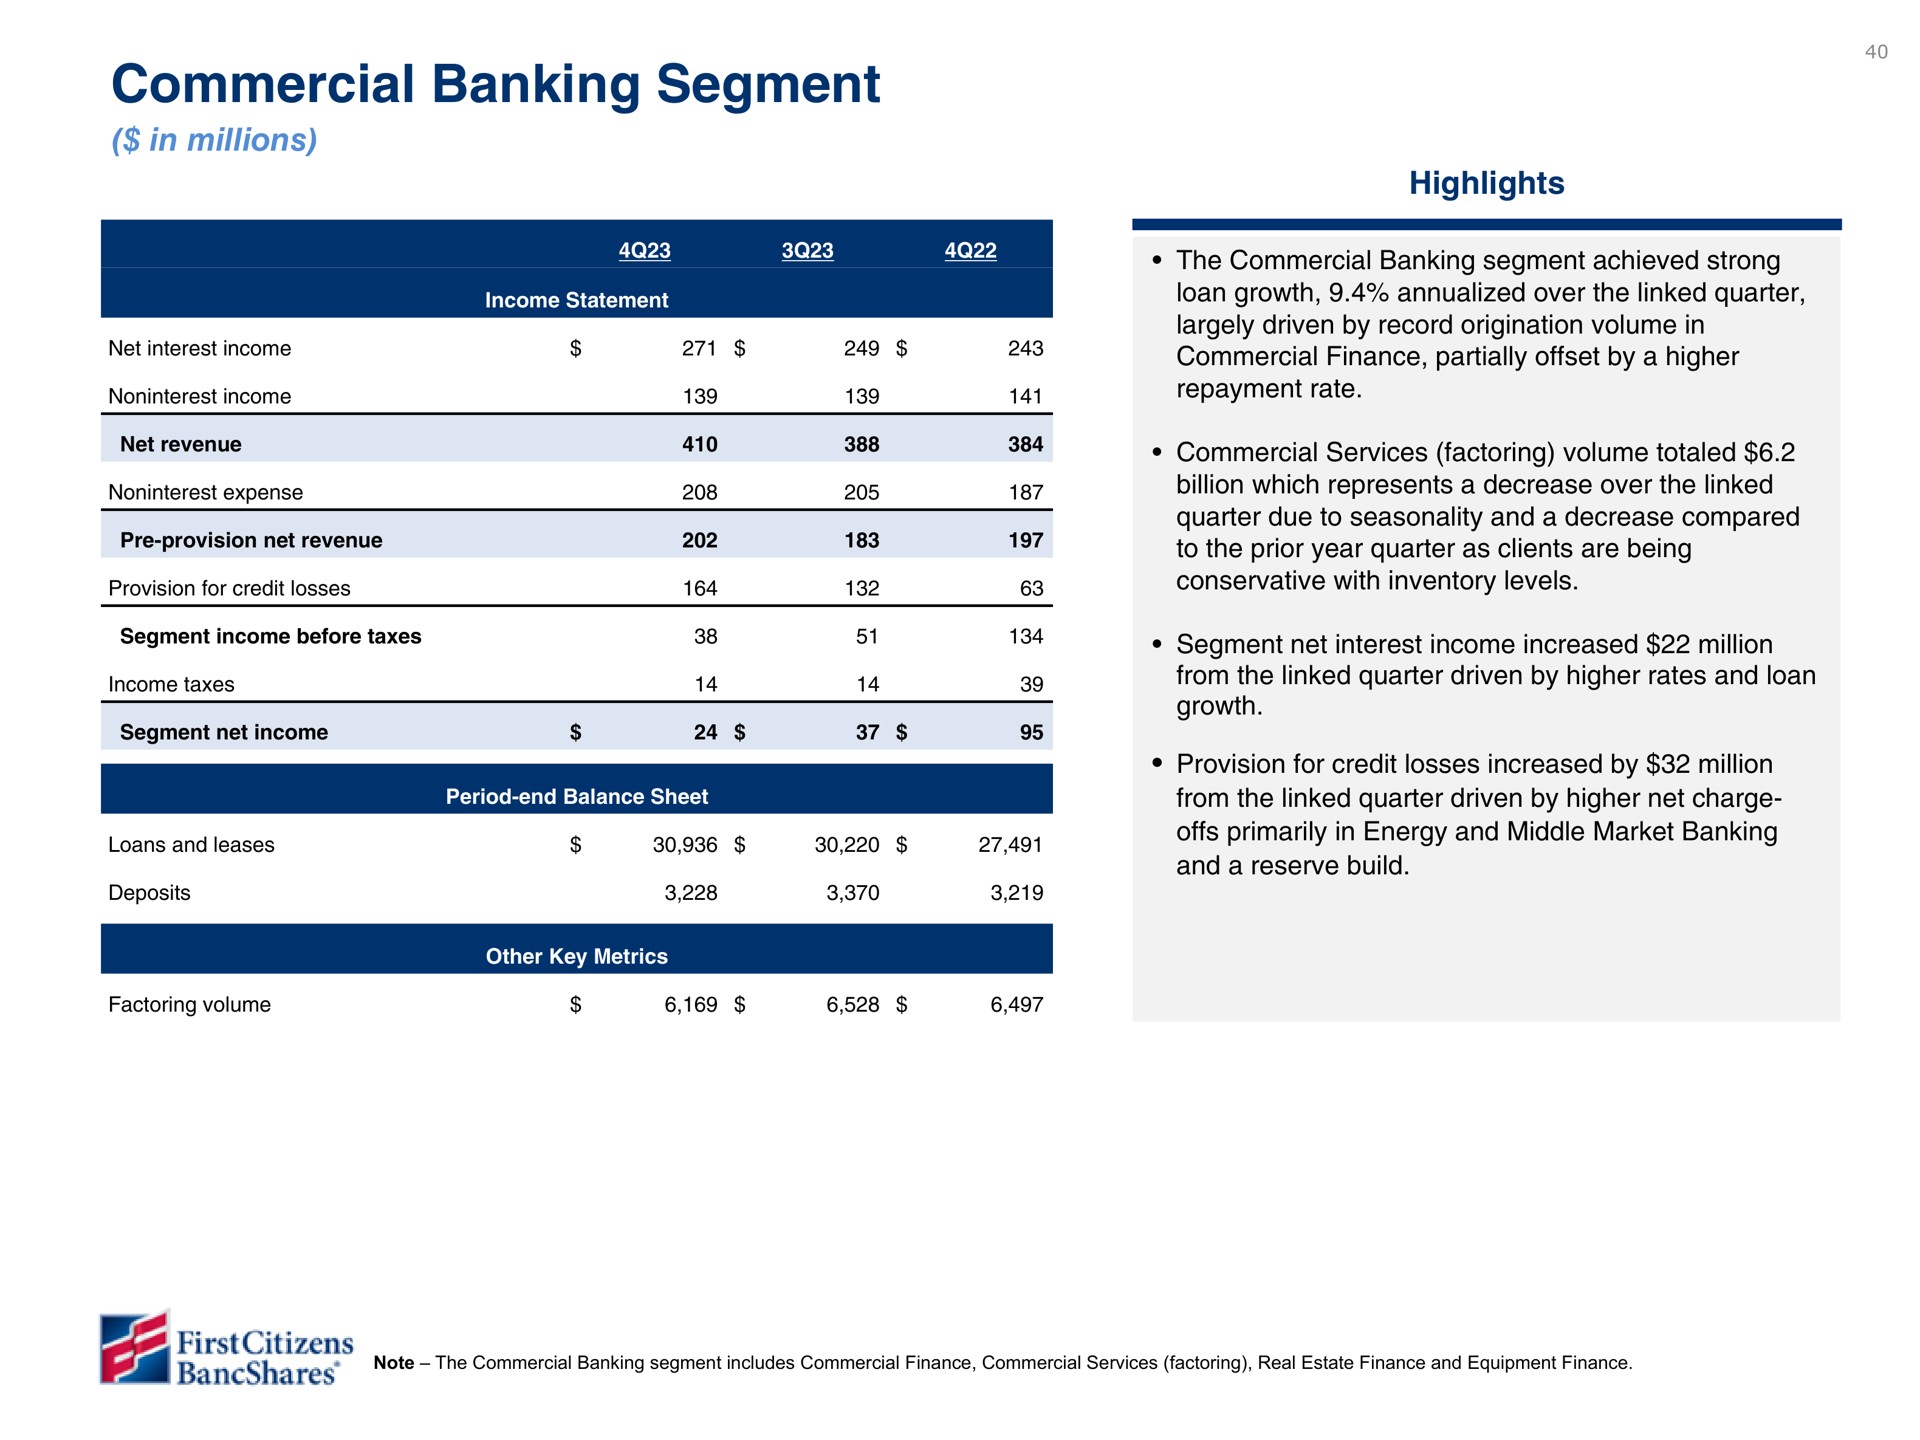 commercial banking segment | First Citizens BancShares